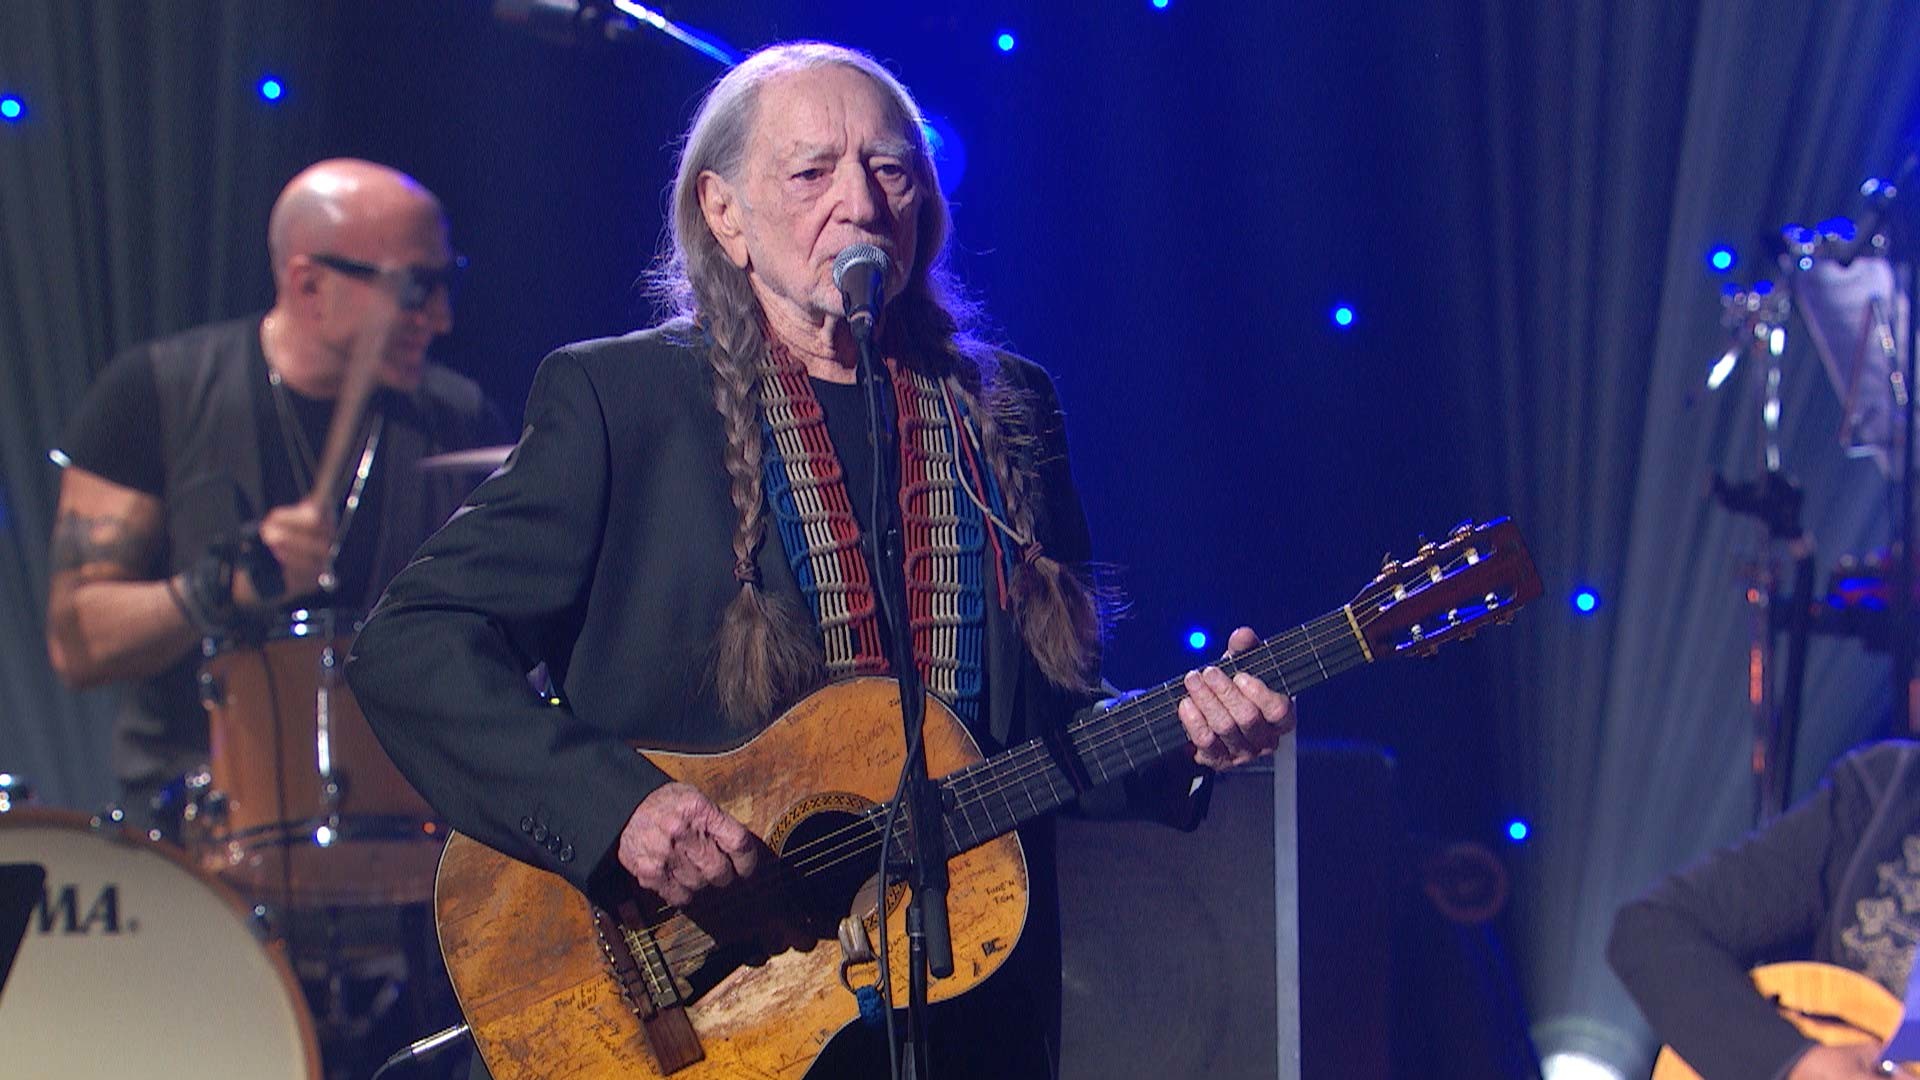 1920x1080 Video Extra - Imagine: John Lennon 75th Birthday Concert - Willie Nelson  Performs “Imagine” at the Imagine: John Lennon 75th Birthday Concert - AMC